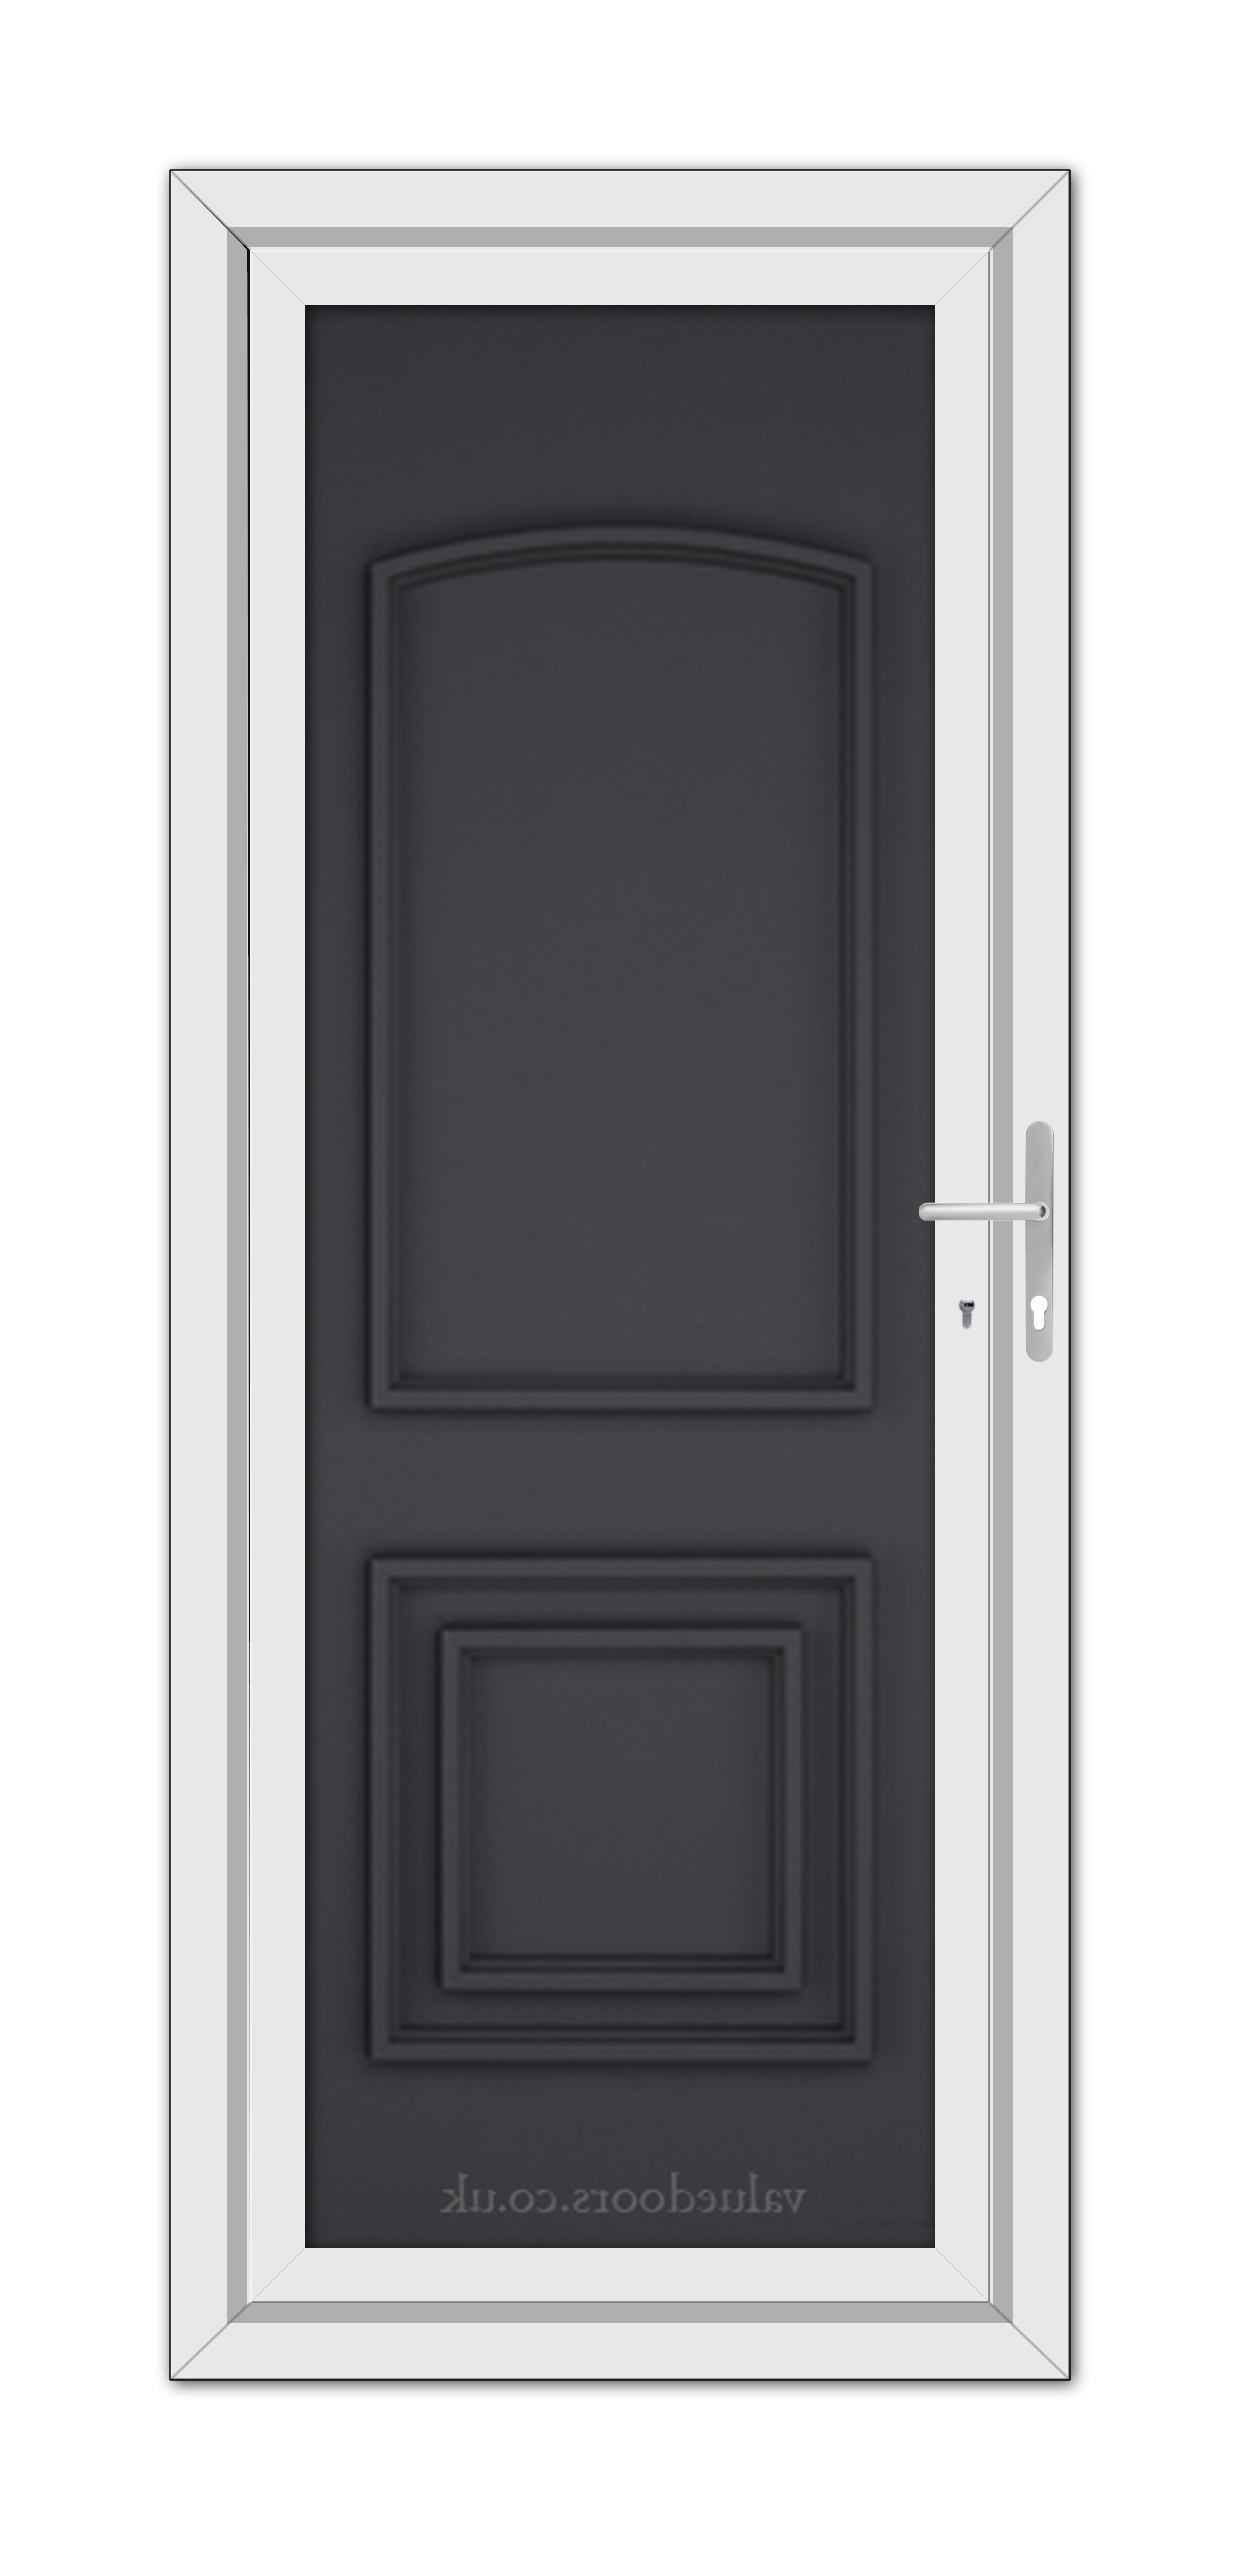 Modern Grey Balmoral Classic Solid uPVC door with a white frame and a steel handle, viewed from the front.